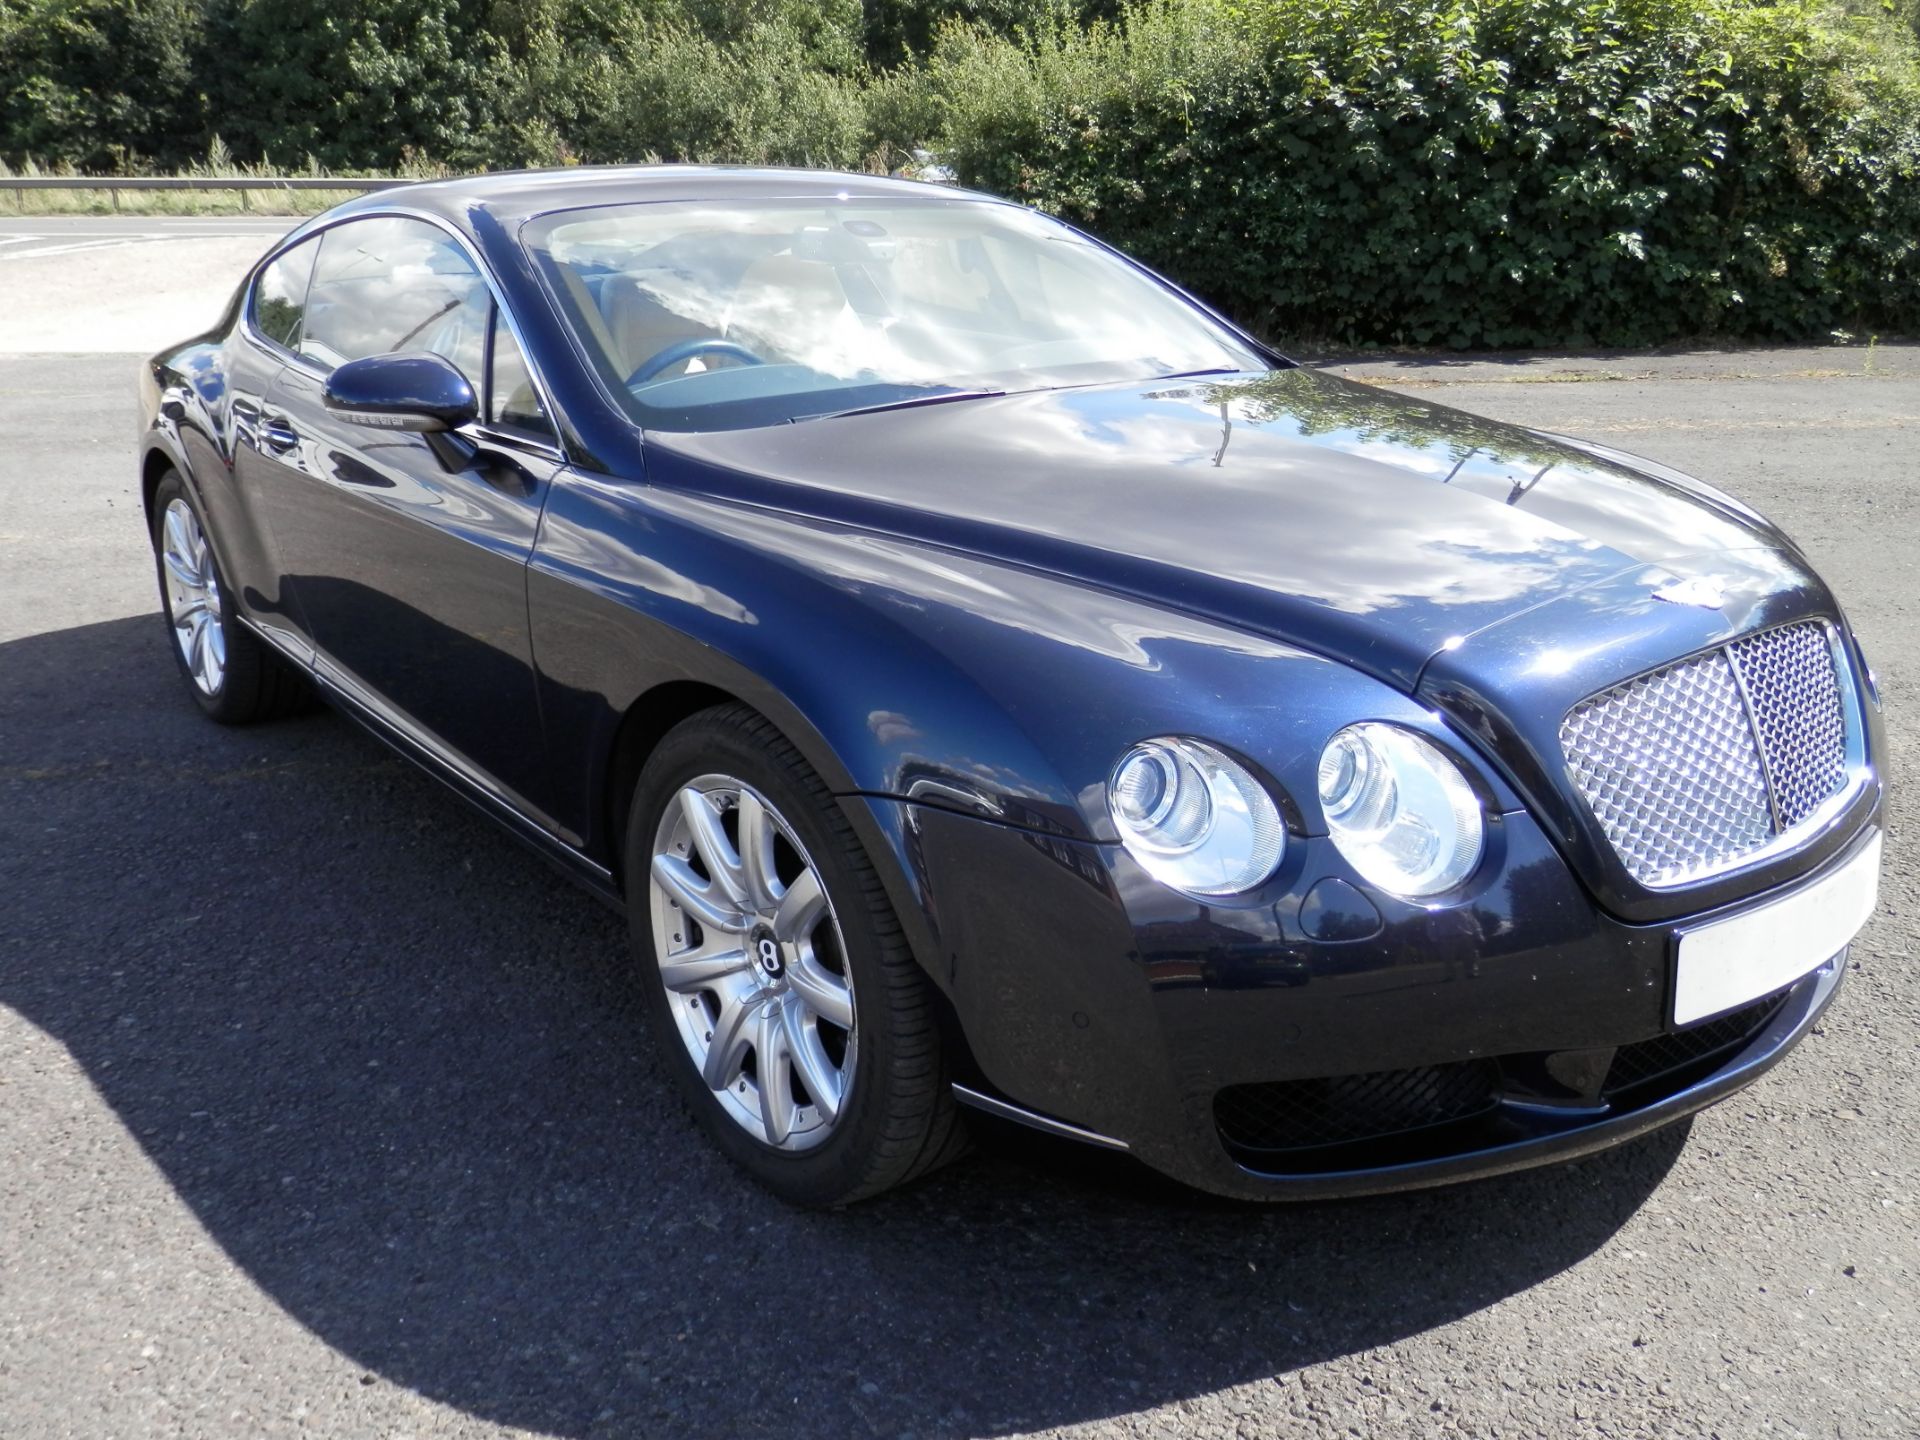 STUNNING 2007 BENTLEY GT CONTINENTAL, 6.0L TWIN TURBO,35K MILES, BLUE, CREAM LEATHER, FULL HISTORY.